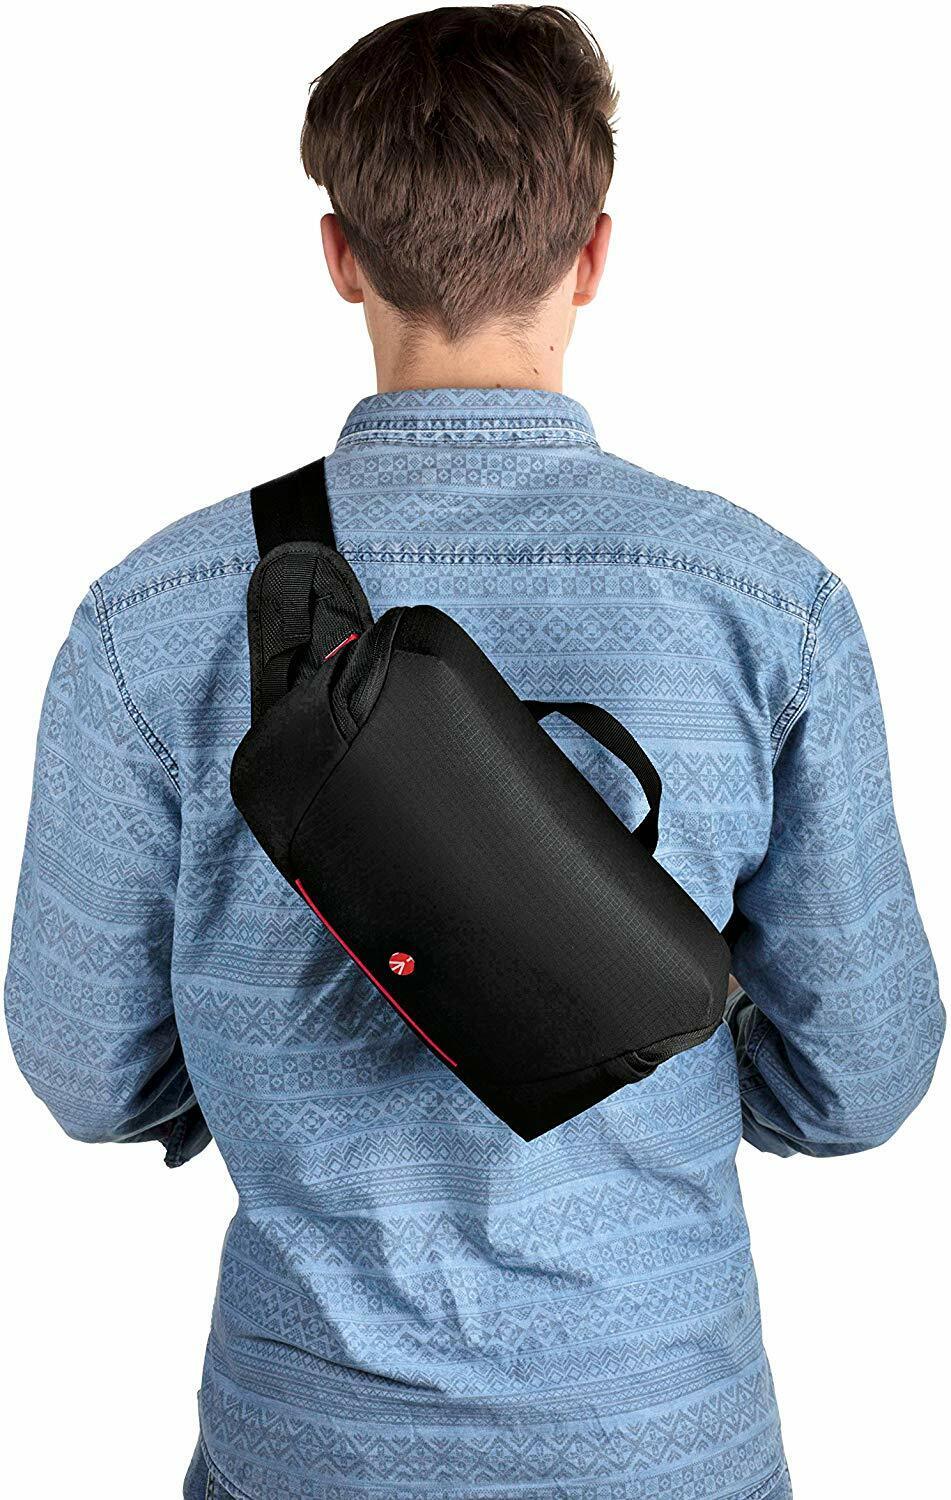 Manfrotto Drone Sling Bag - Water Repellent Black